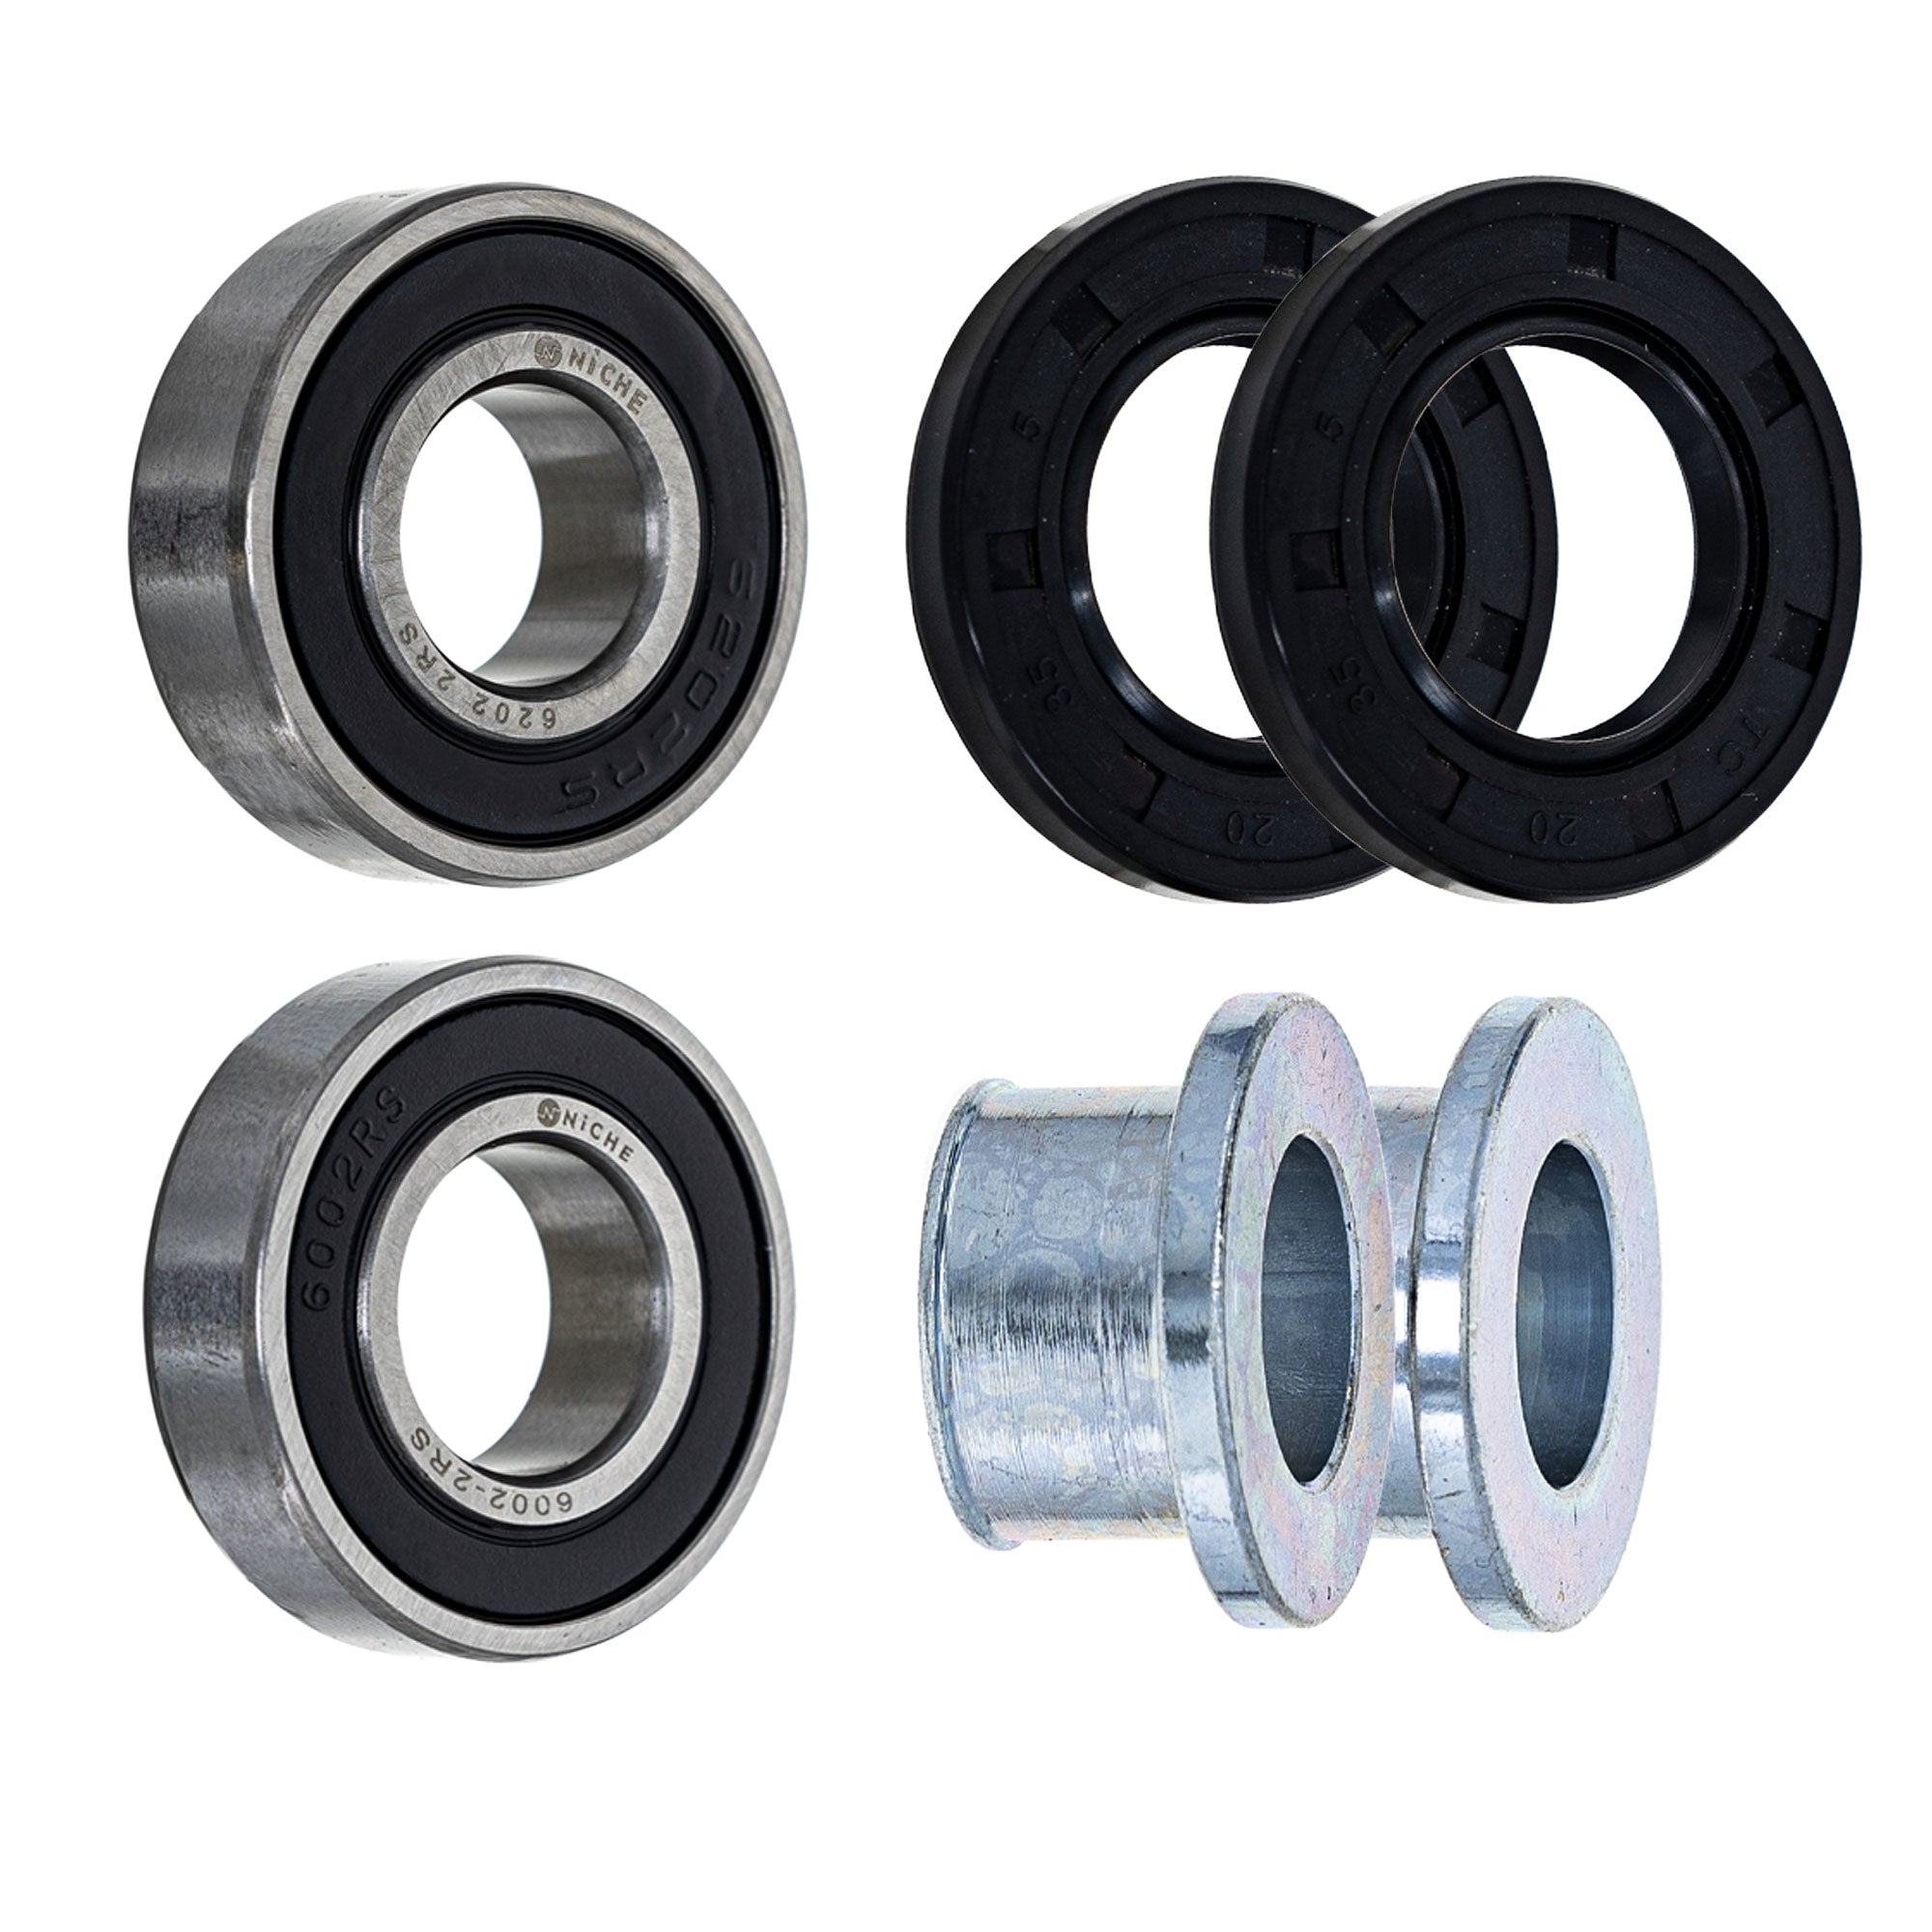 Wheel Bearing Spacer Seal Kit for zOTHER Ref No YZ85 YZ80 YZ65 RM85 NICHE MK1009216